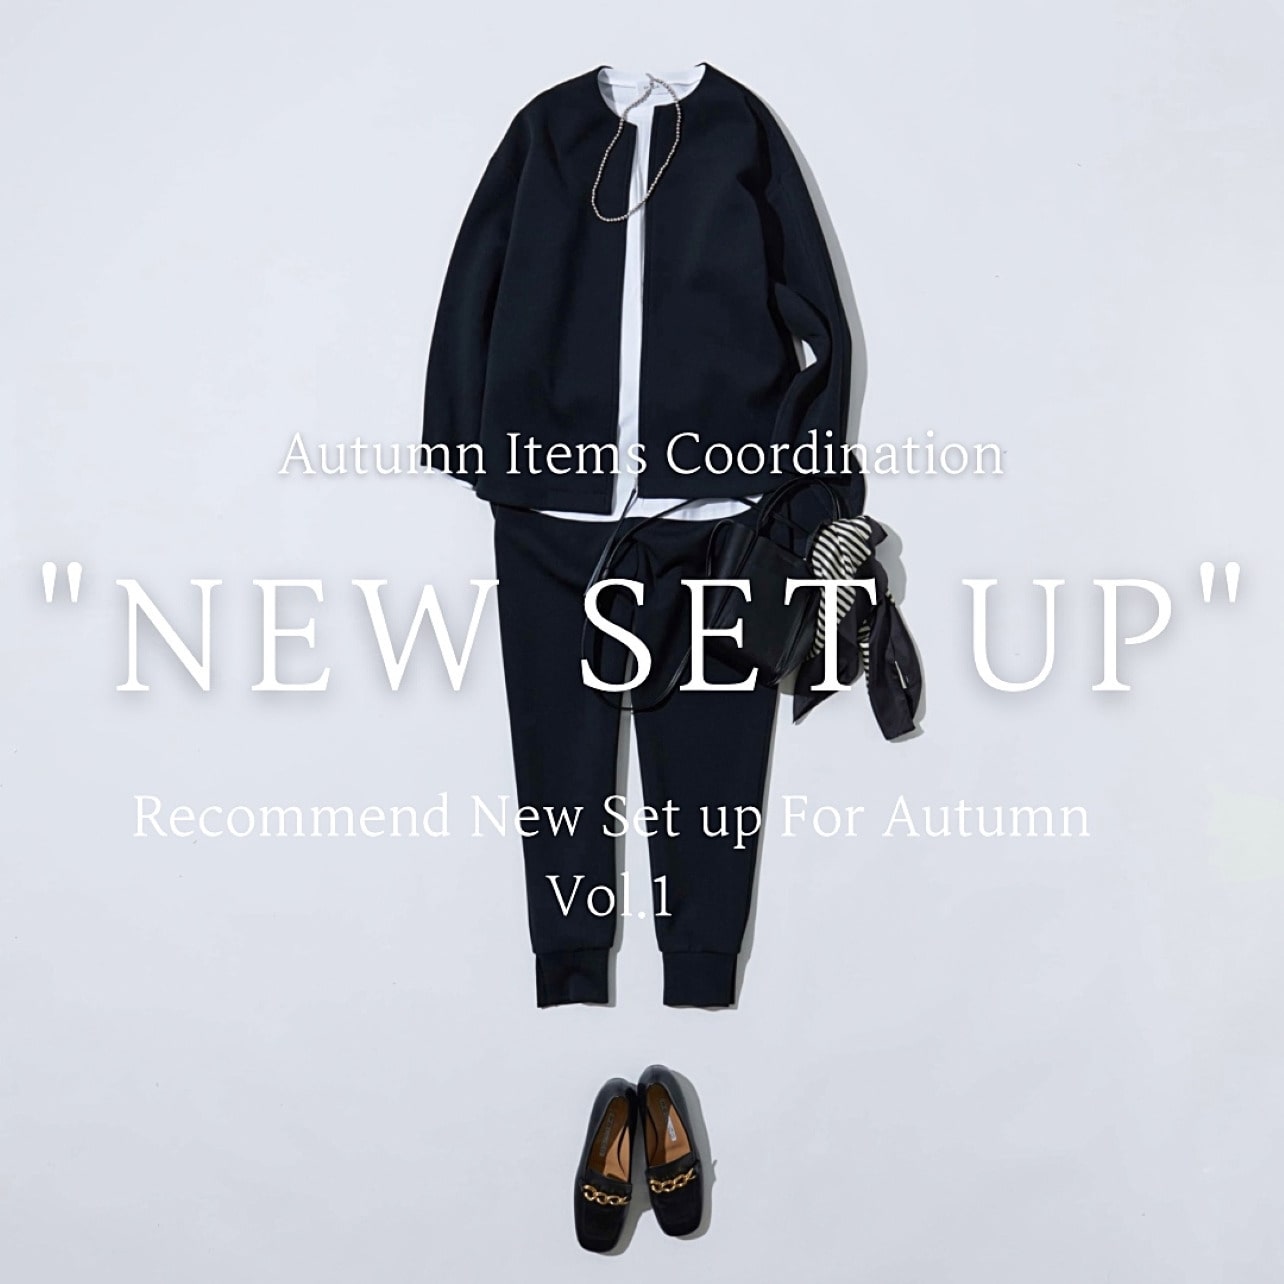 Recommend Items Styling "NEW SET UP" Vol.1